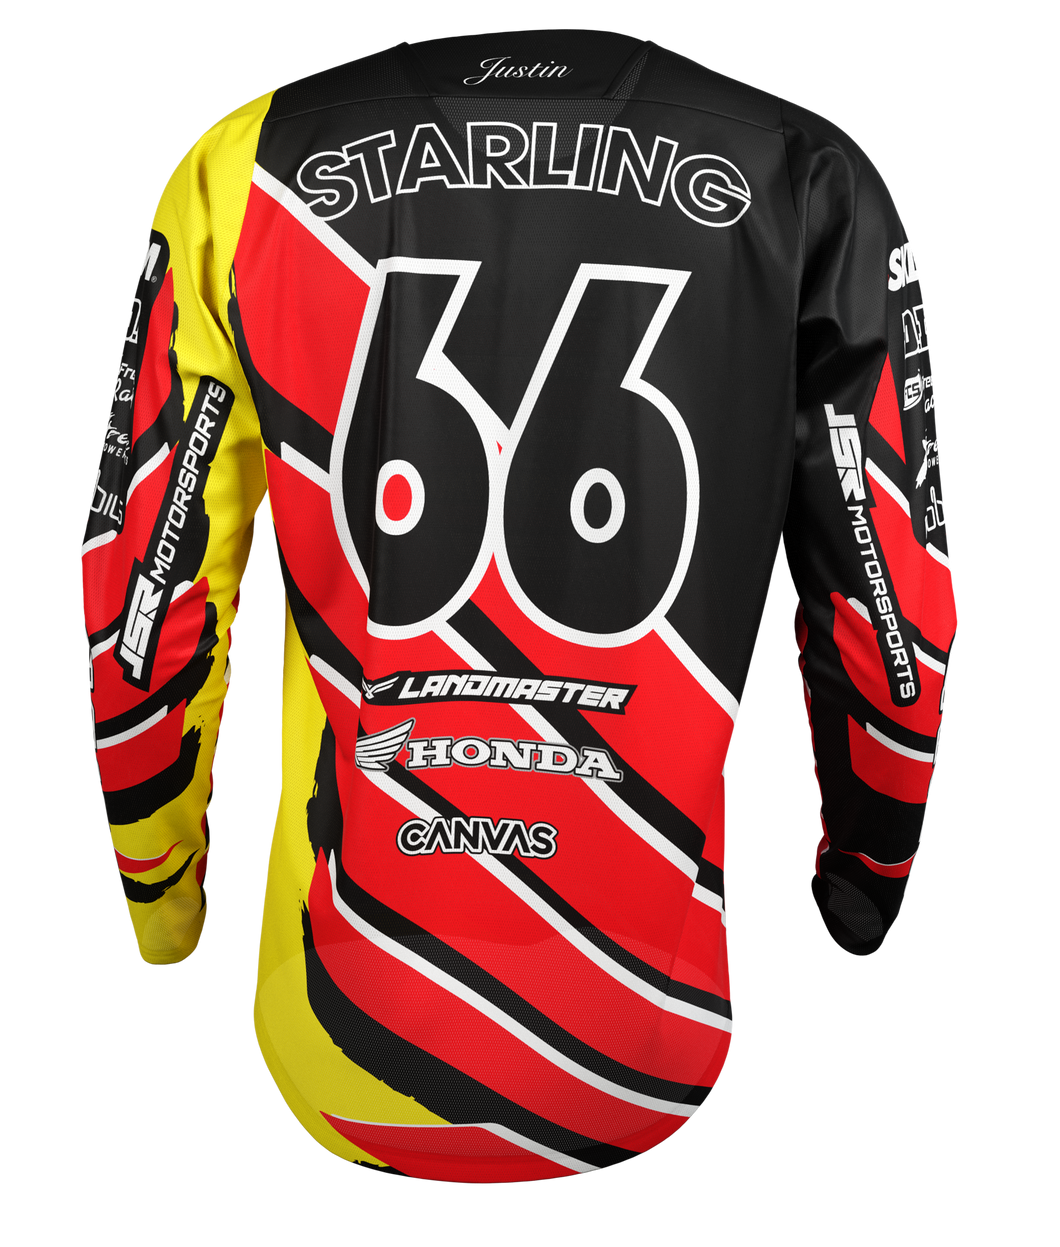 Justin Starling Racer Replica Jersey - San Diego